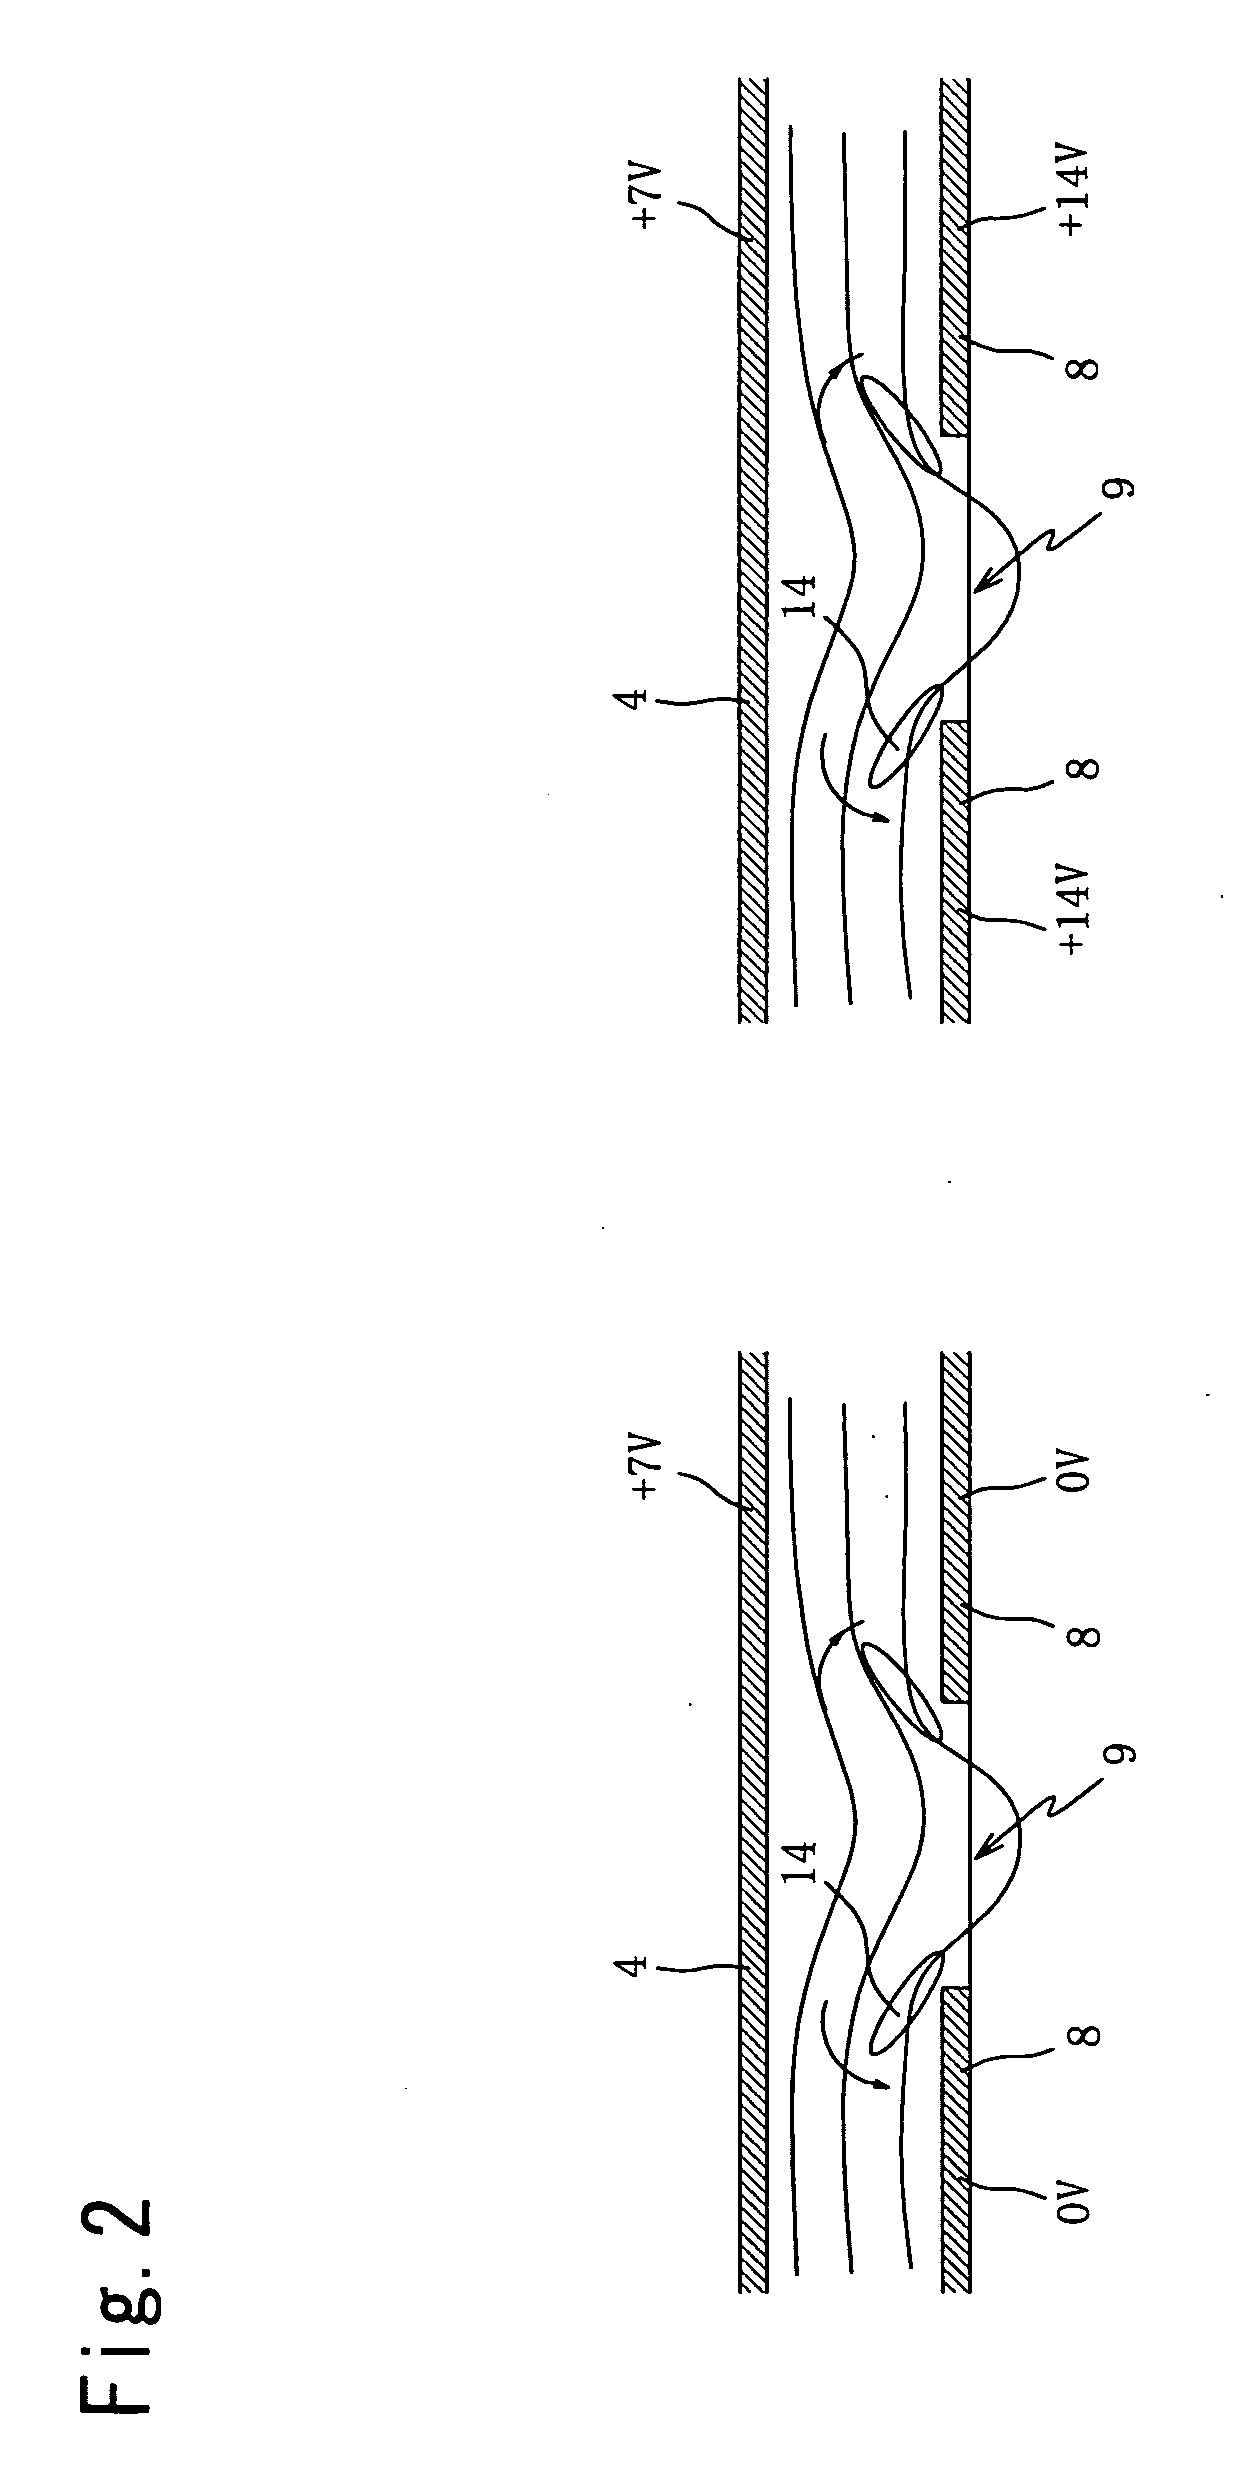 Color active matrix type vertically aligned mode liquid crystal display and driving method thereof